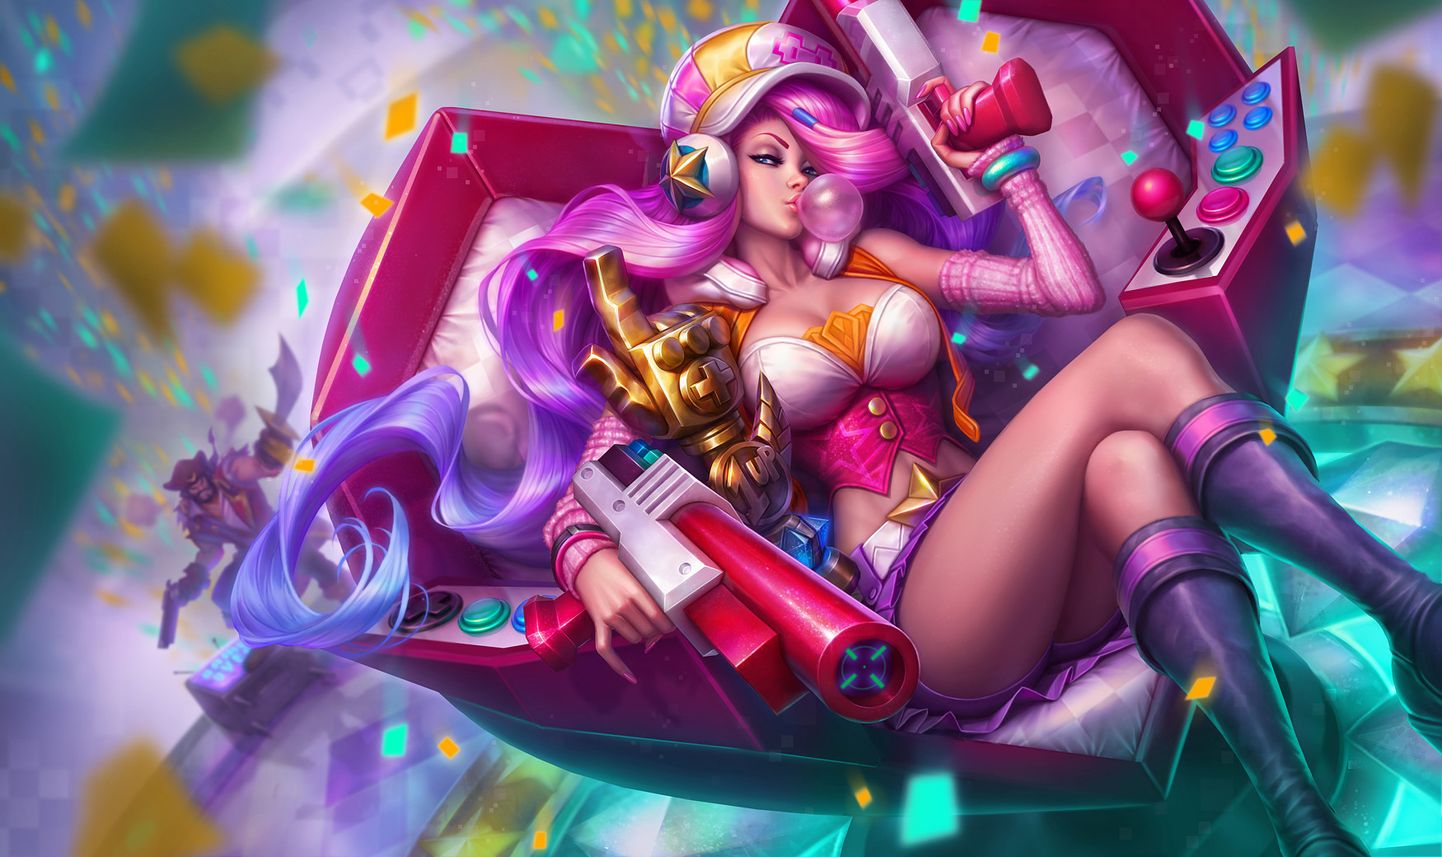 Miss Fortune is tied for the champion with the most skins in League of Legends